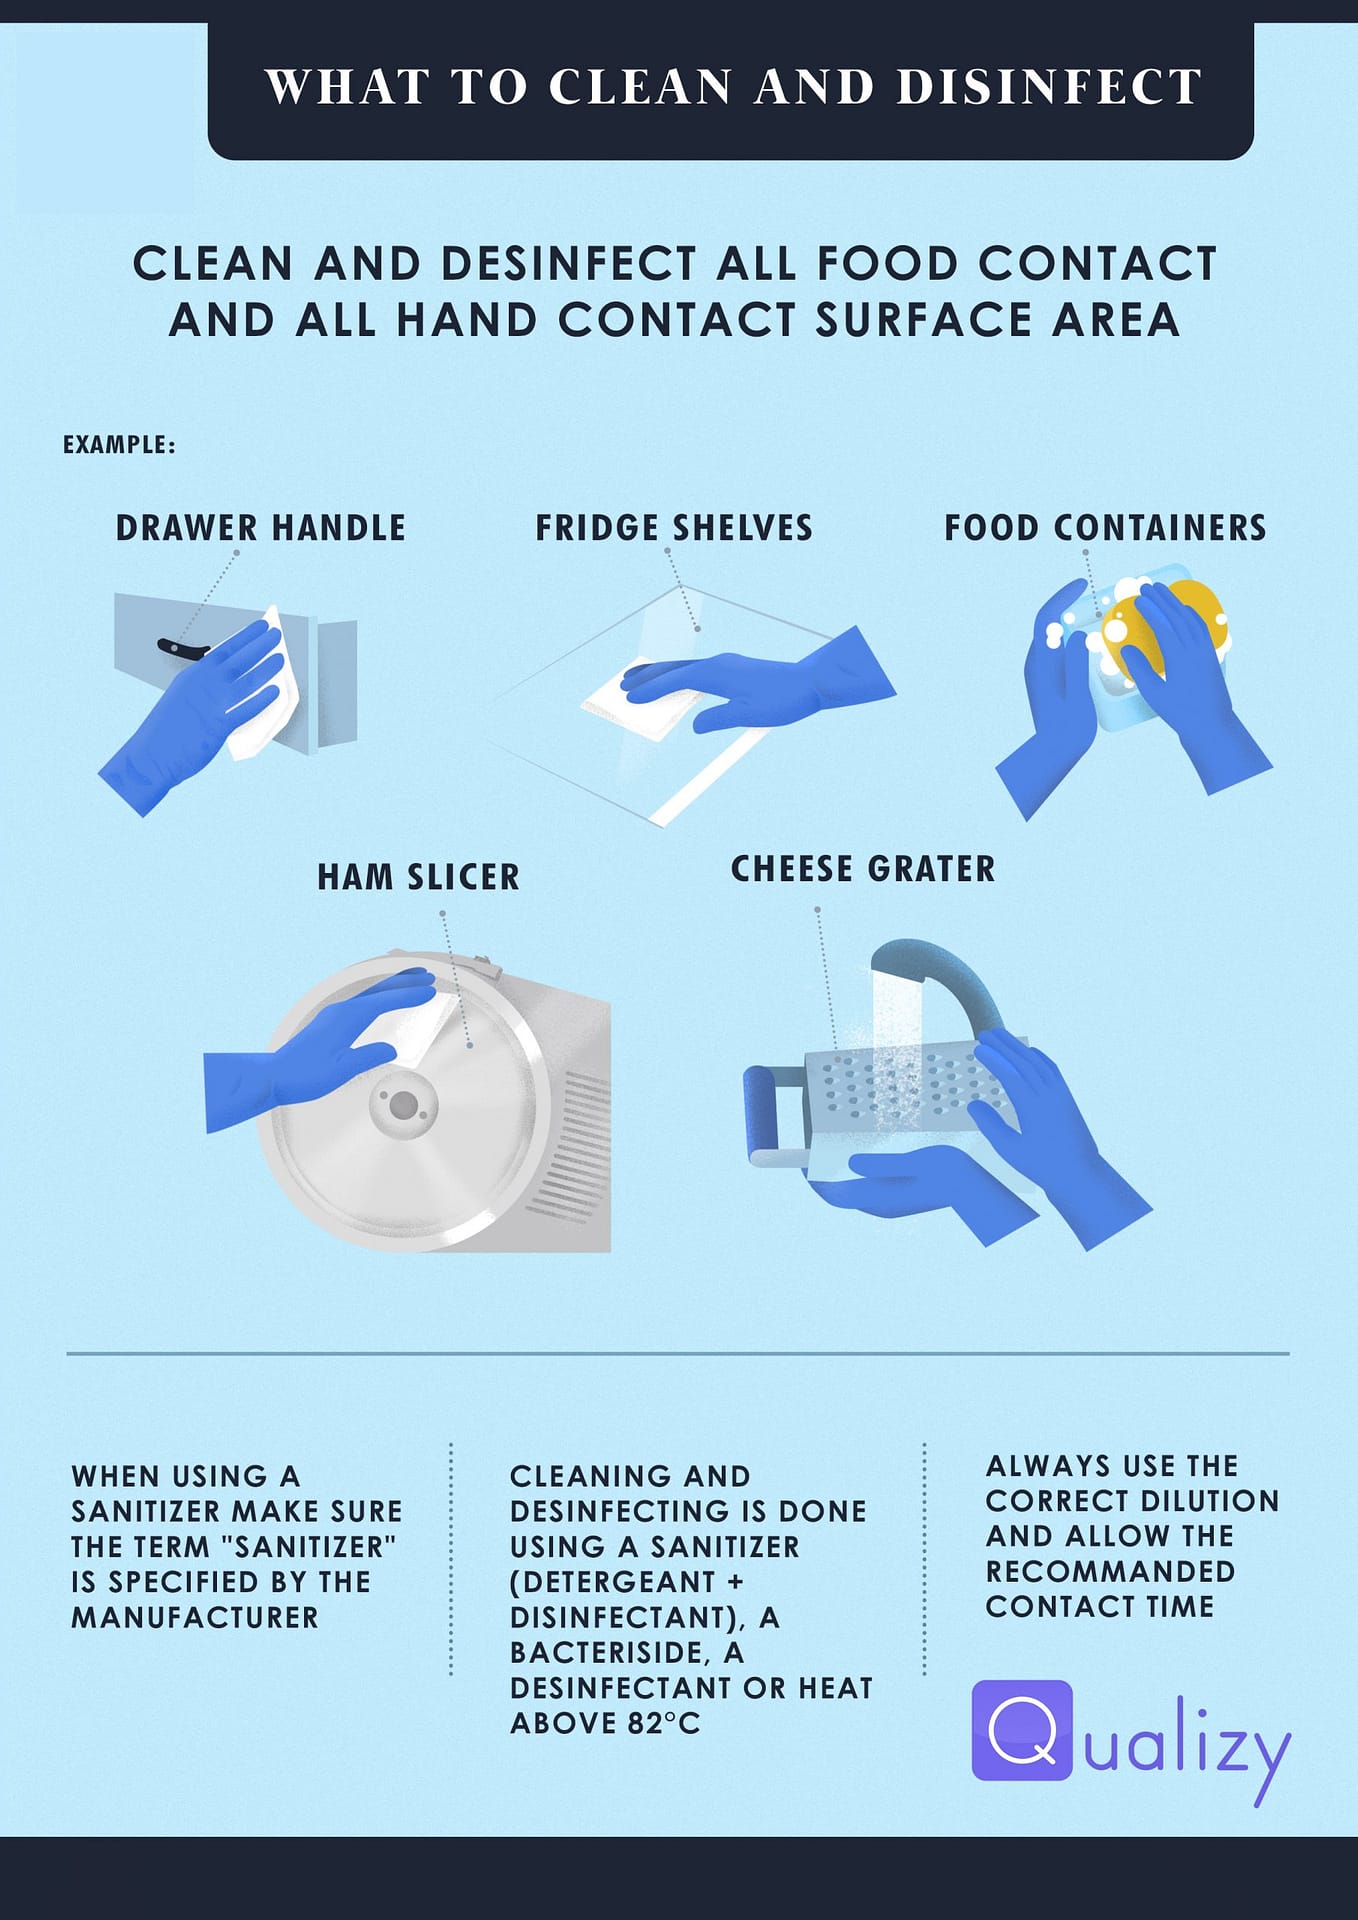 What to clean and disinfect - Infographic